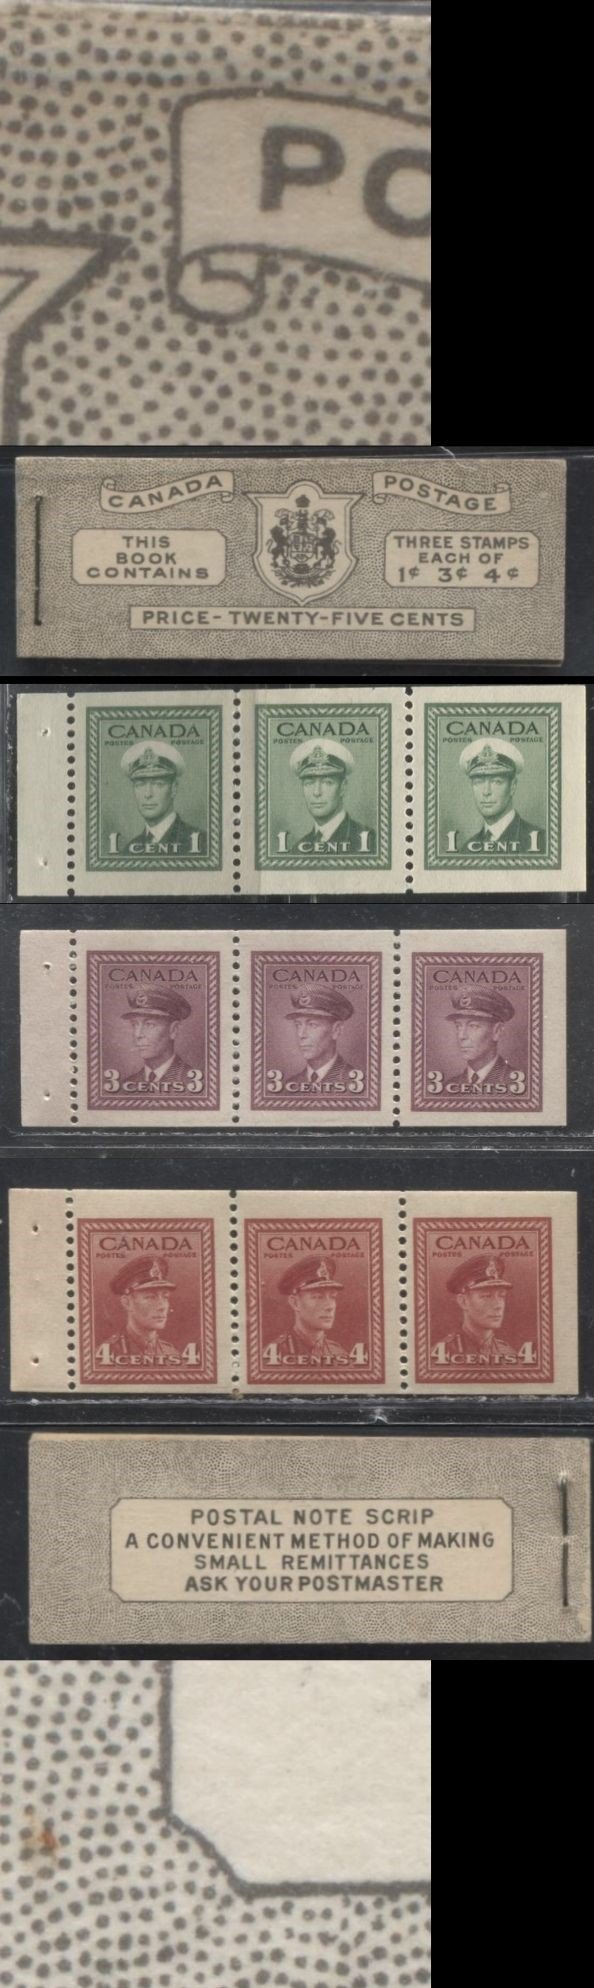 Lot 192 Canada #BK38a 1942-1949 War Issue Complete 25c, English Booklet Containing 1 Pane Each of 3 of 1c Green, 3c Rosy Plum and 4c Carmine Red, Harris Front Cover Type IVd , Back Cover Hai, 7c & 6c Rate Page